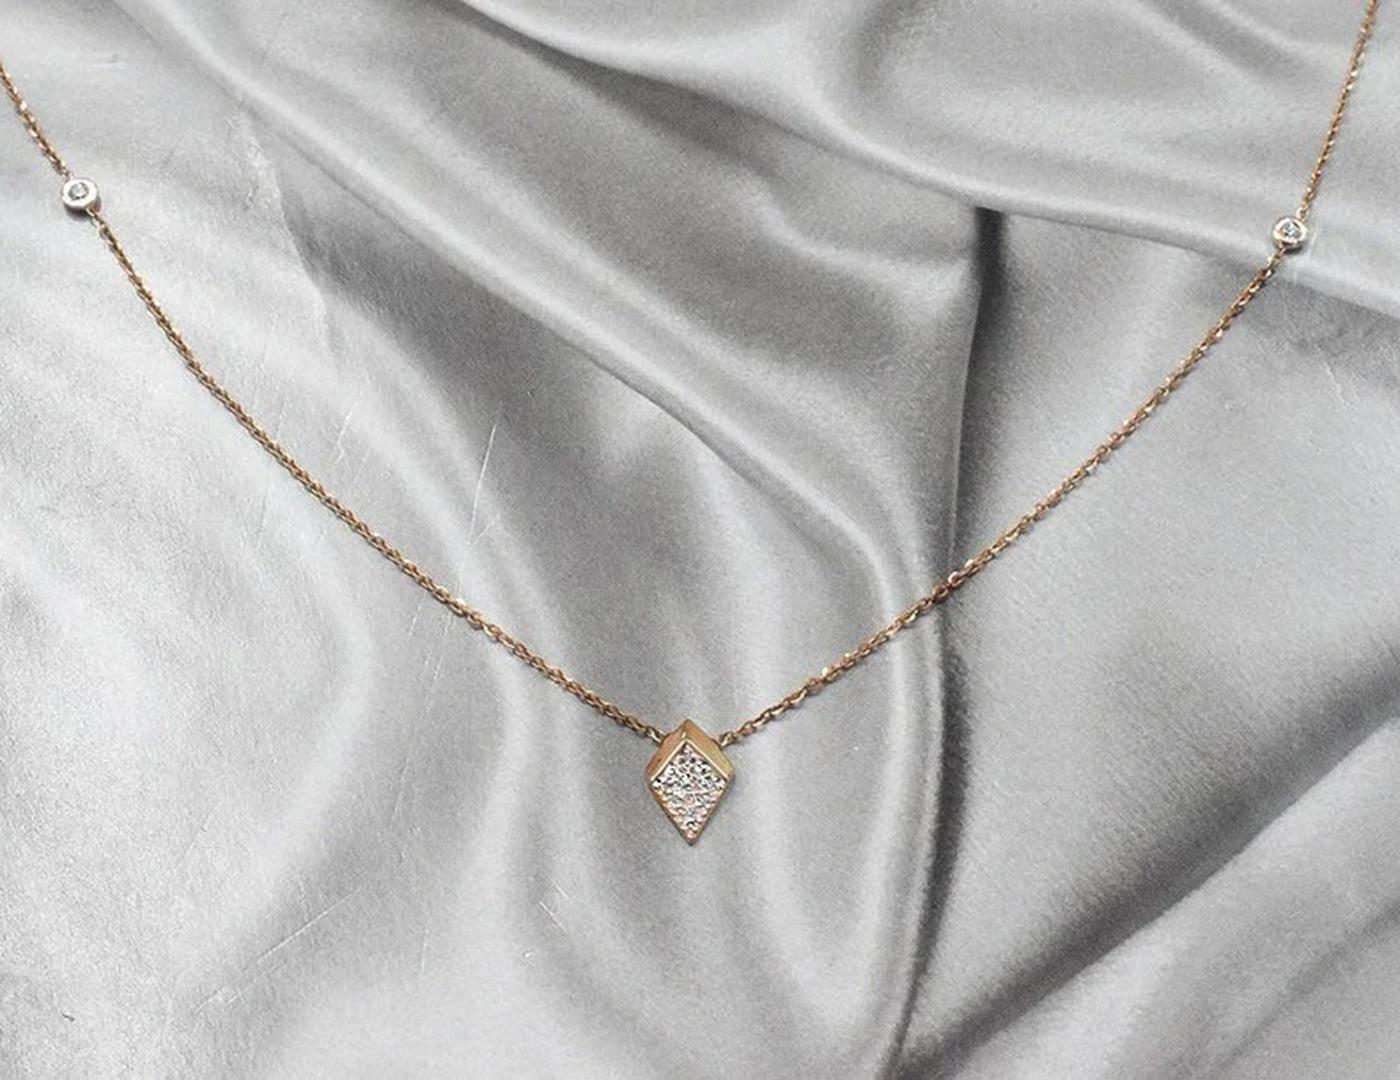 Minimalist Diamond Charm Necklace with Thin Gold Chain is made of 14k solid gold.
Available in three colors of gold: Yellow Gold / White Gold / Rose Gold.

Natural genuine round cut diamond each diamond is hand selected by me to ensure quality and